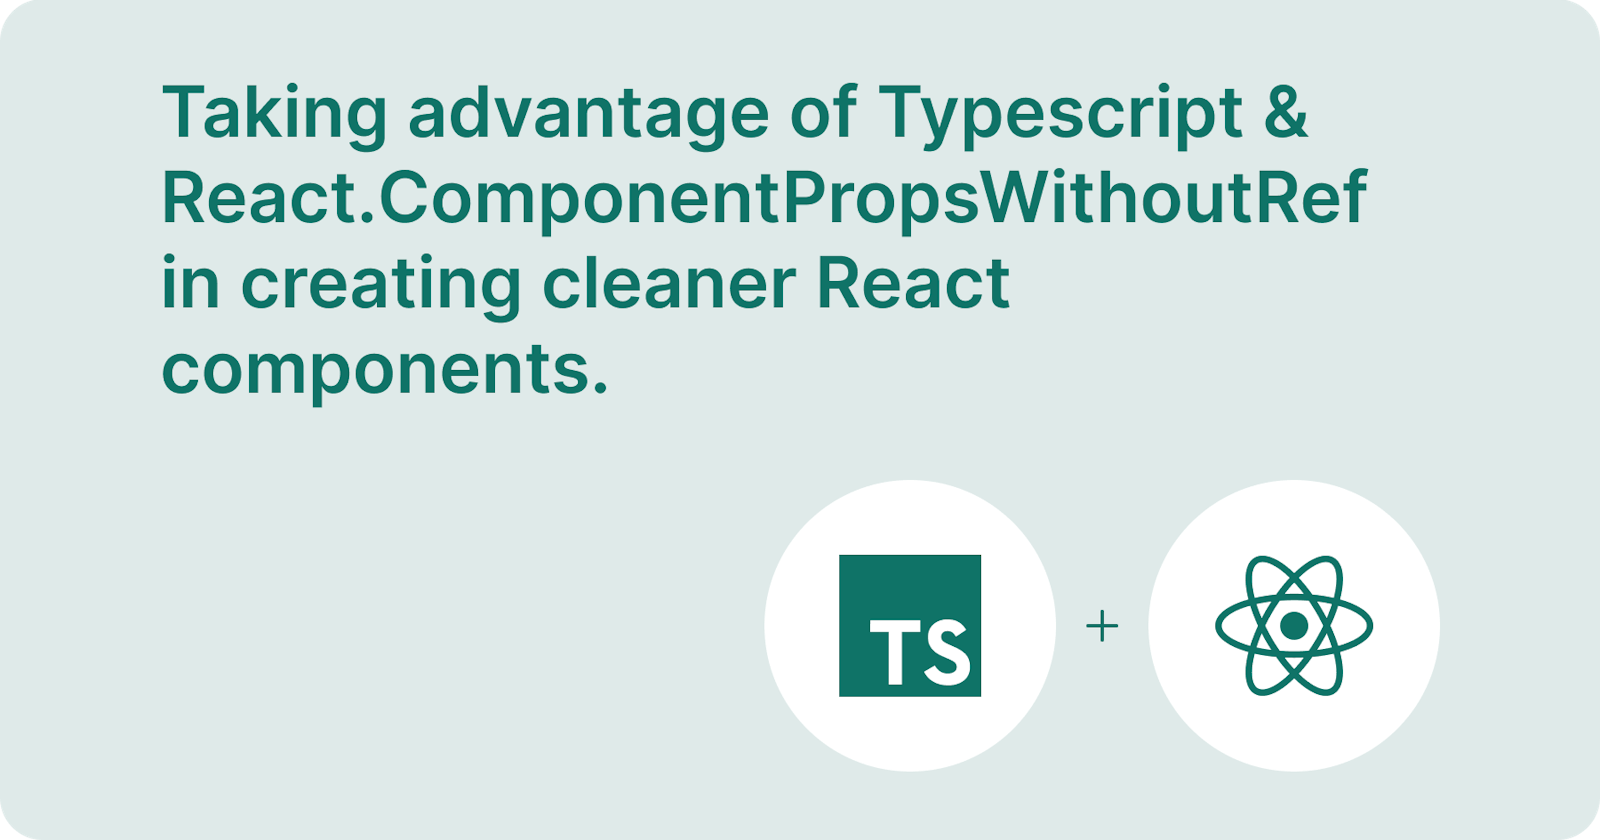 Taking advantage of Typescript & React.ComponentPropsWithoutRef in creating cleaner React components.